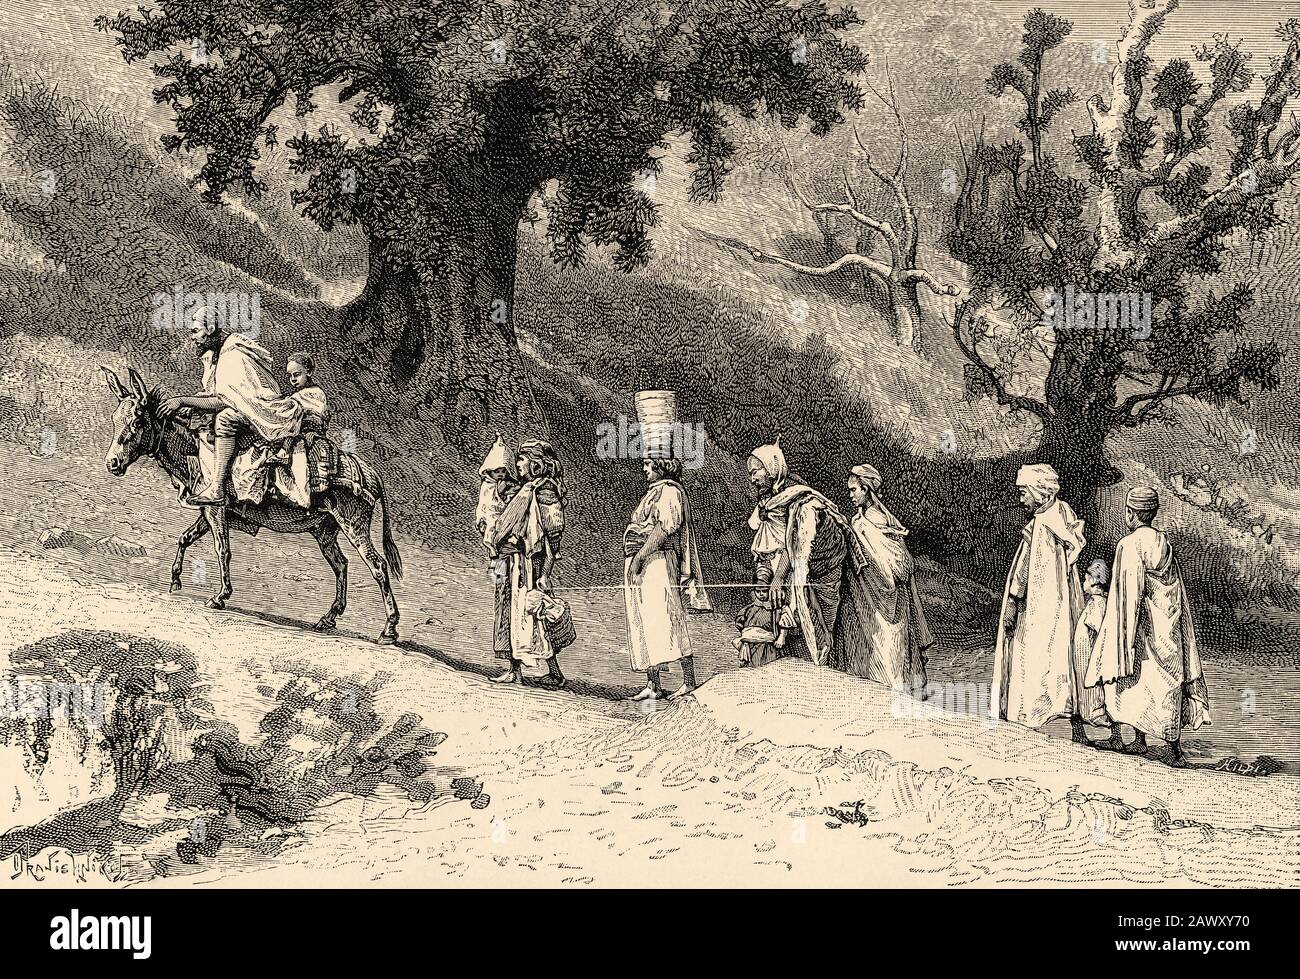 Kabyle family group travelling, Algeria. North Africa. Old engraving illustration from the book Nueva Geografia Universal by Eliseo Reclus 1889 Stock Photo